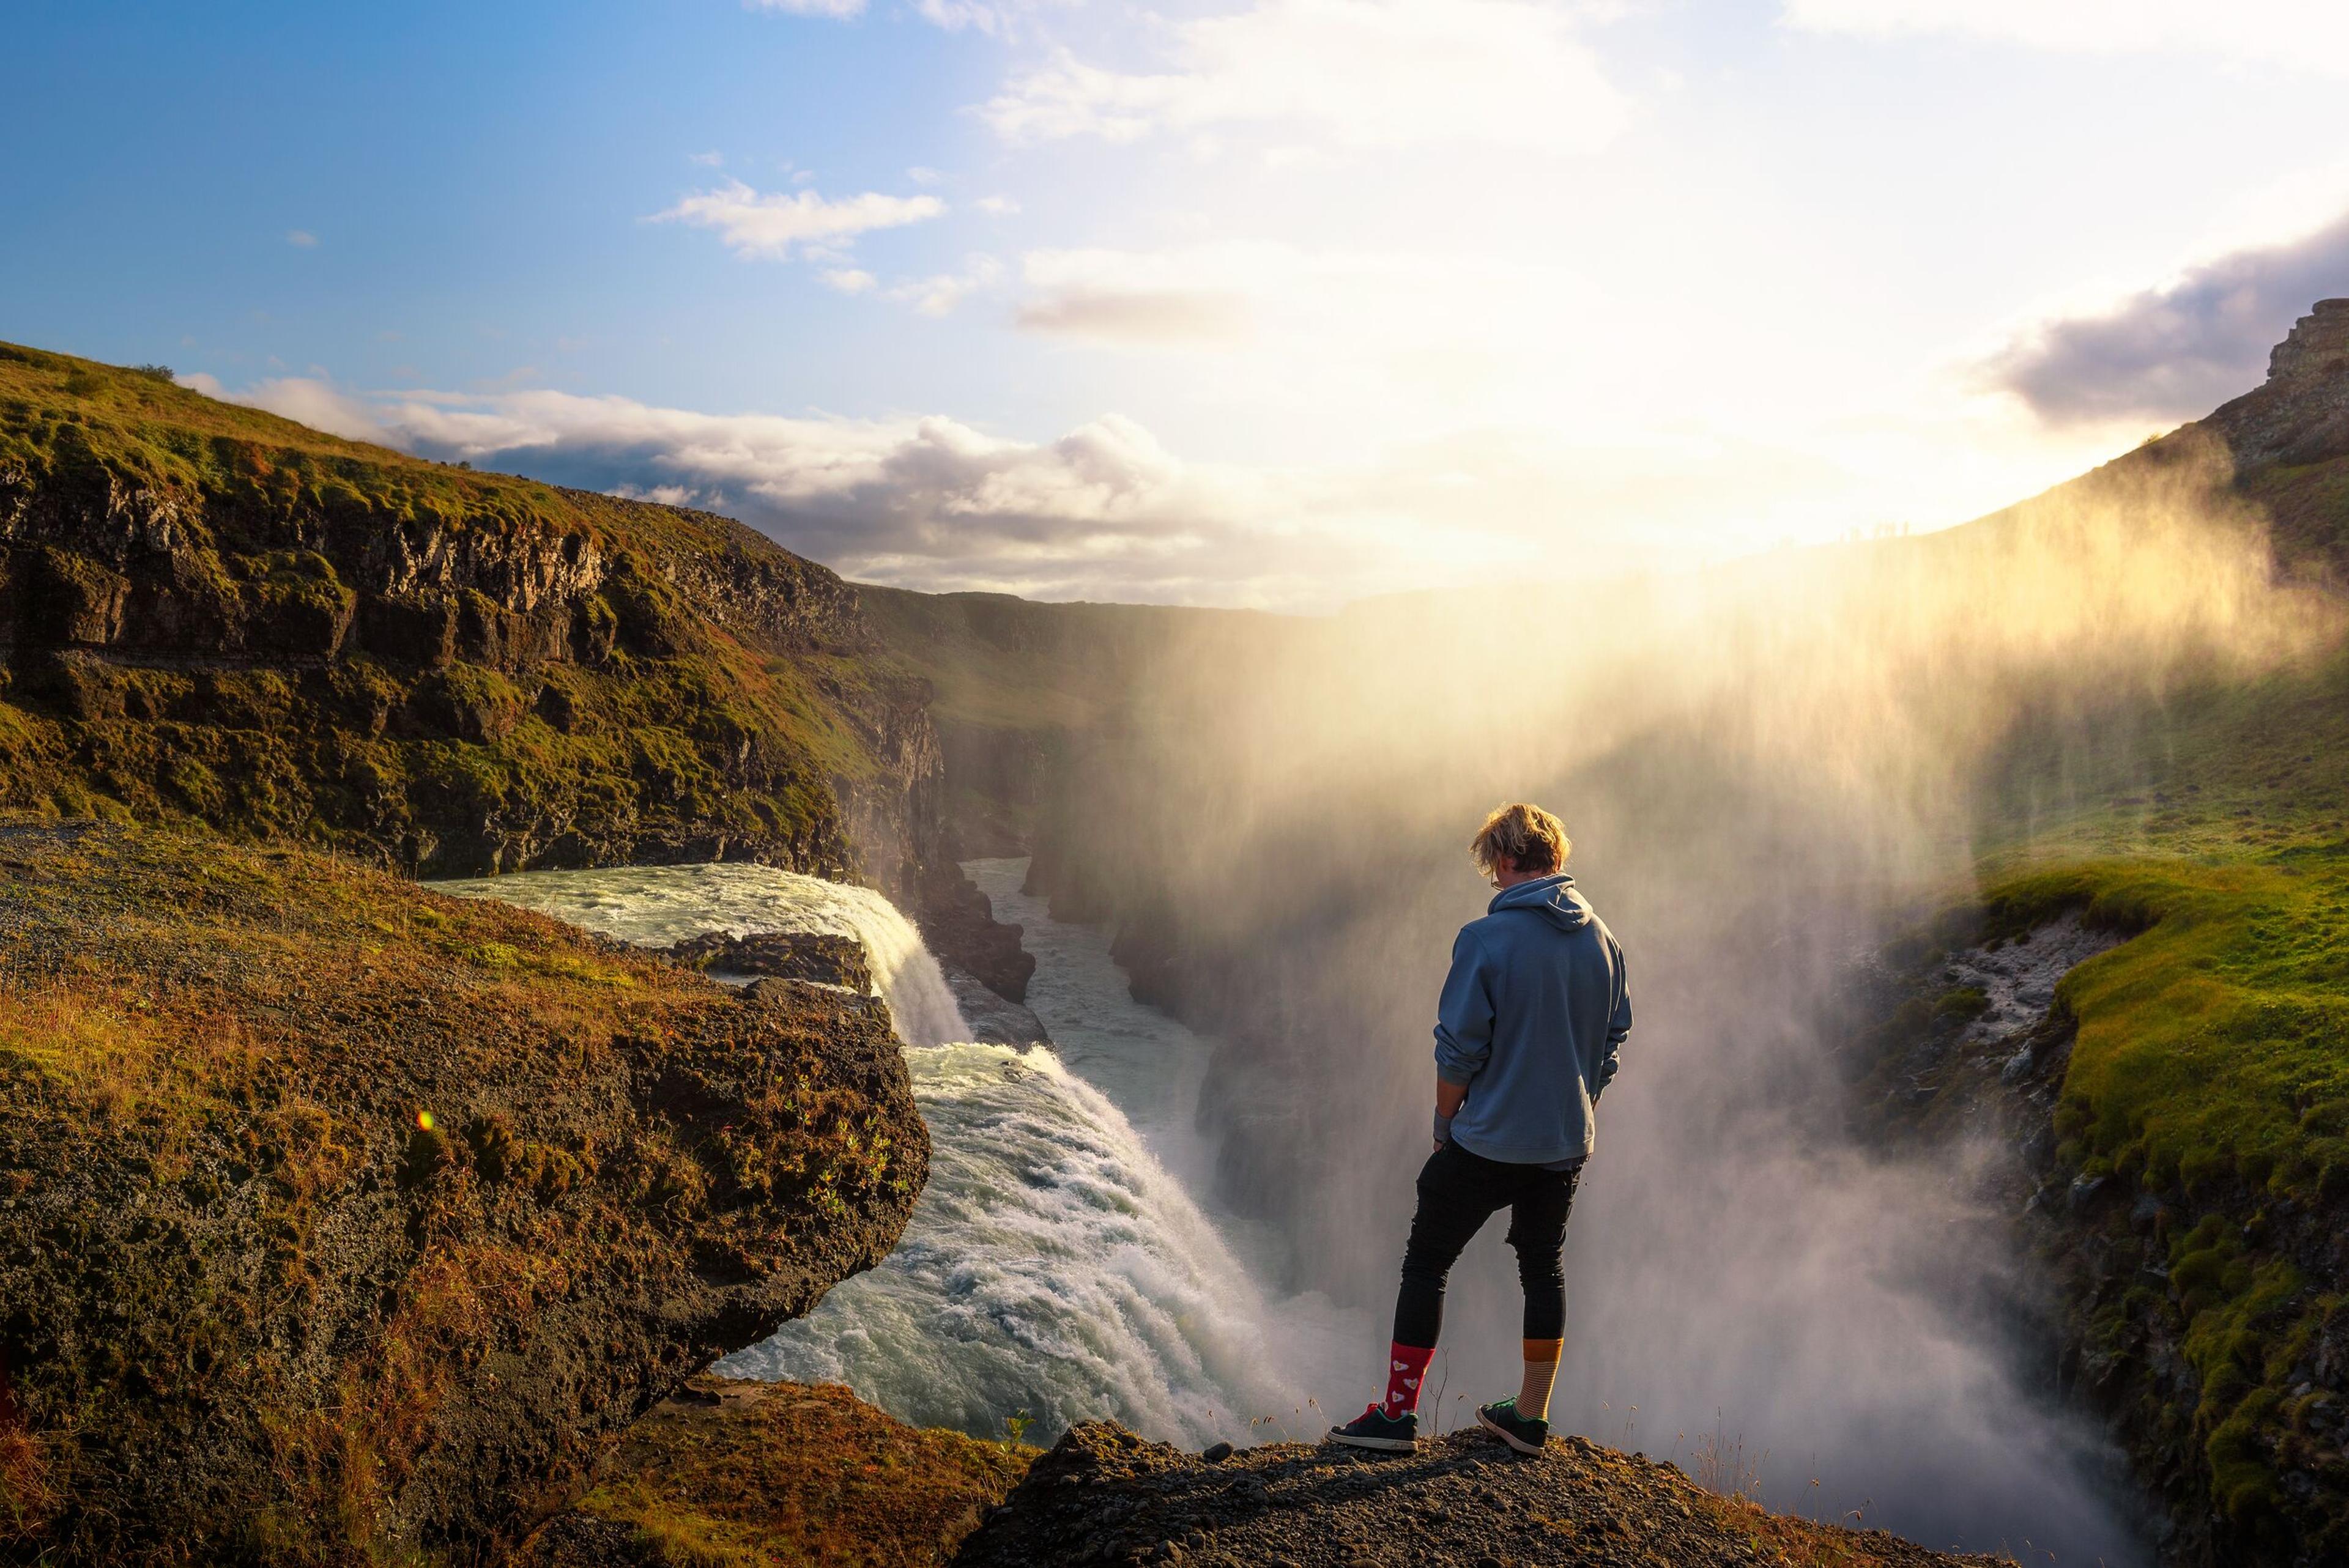 A person standing near the edge of Gullfoss waterfall in Iceland, enveloped in mist and bathed in golden sunlight.